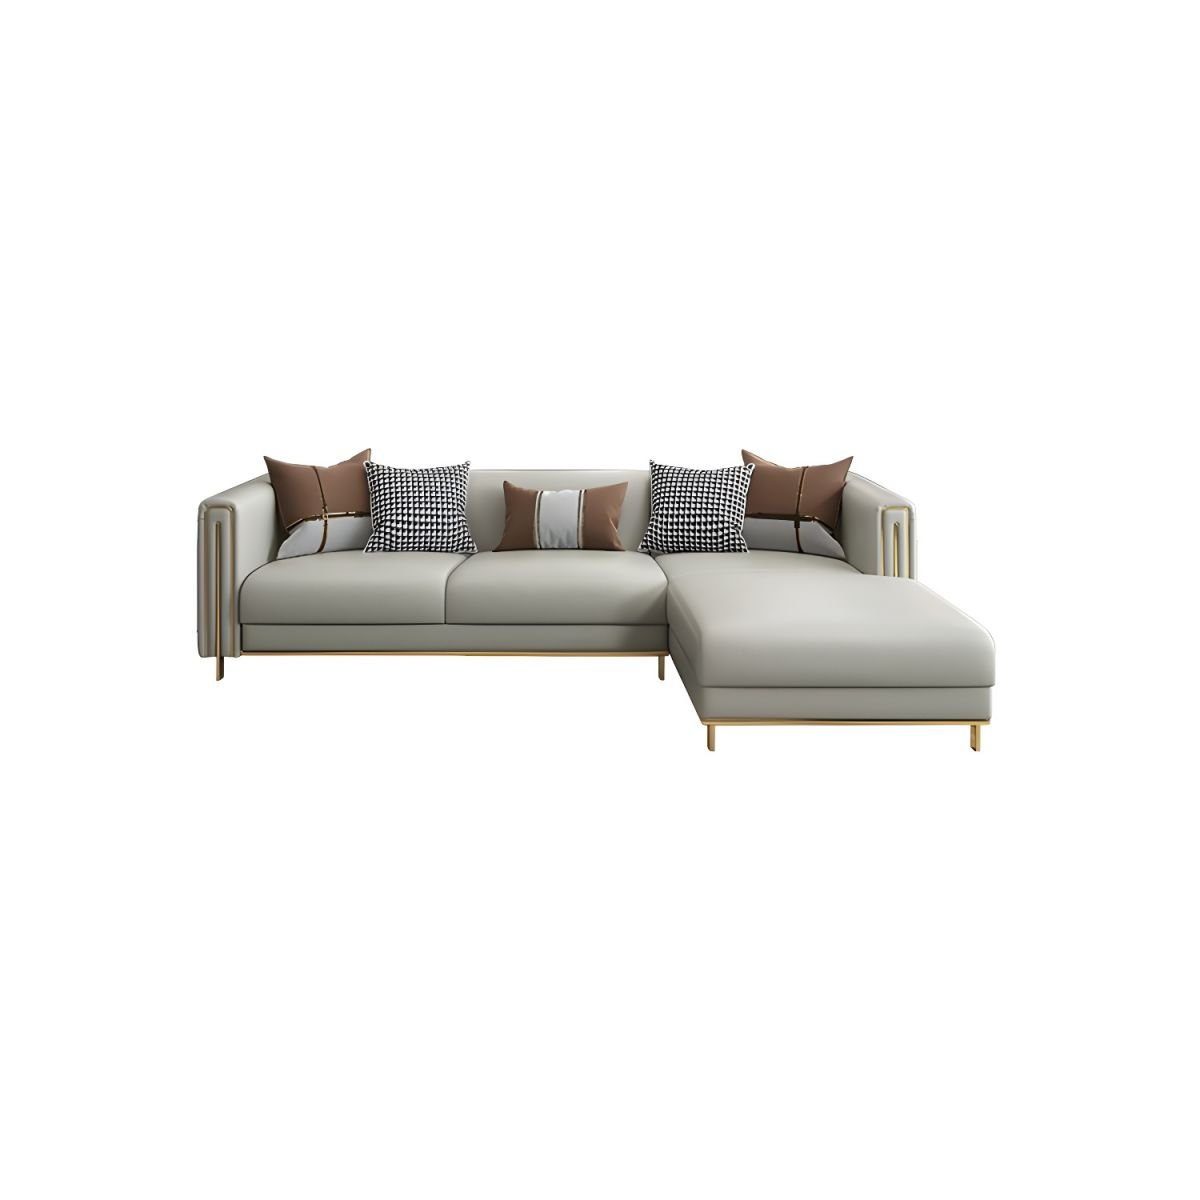 Beige Glam L-Shape Wooden Nappa Sofa Chaise with Square Arm, 26' Length - Right Nappa 94"L x 67"W x 29"H